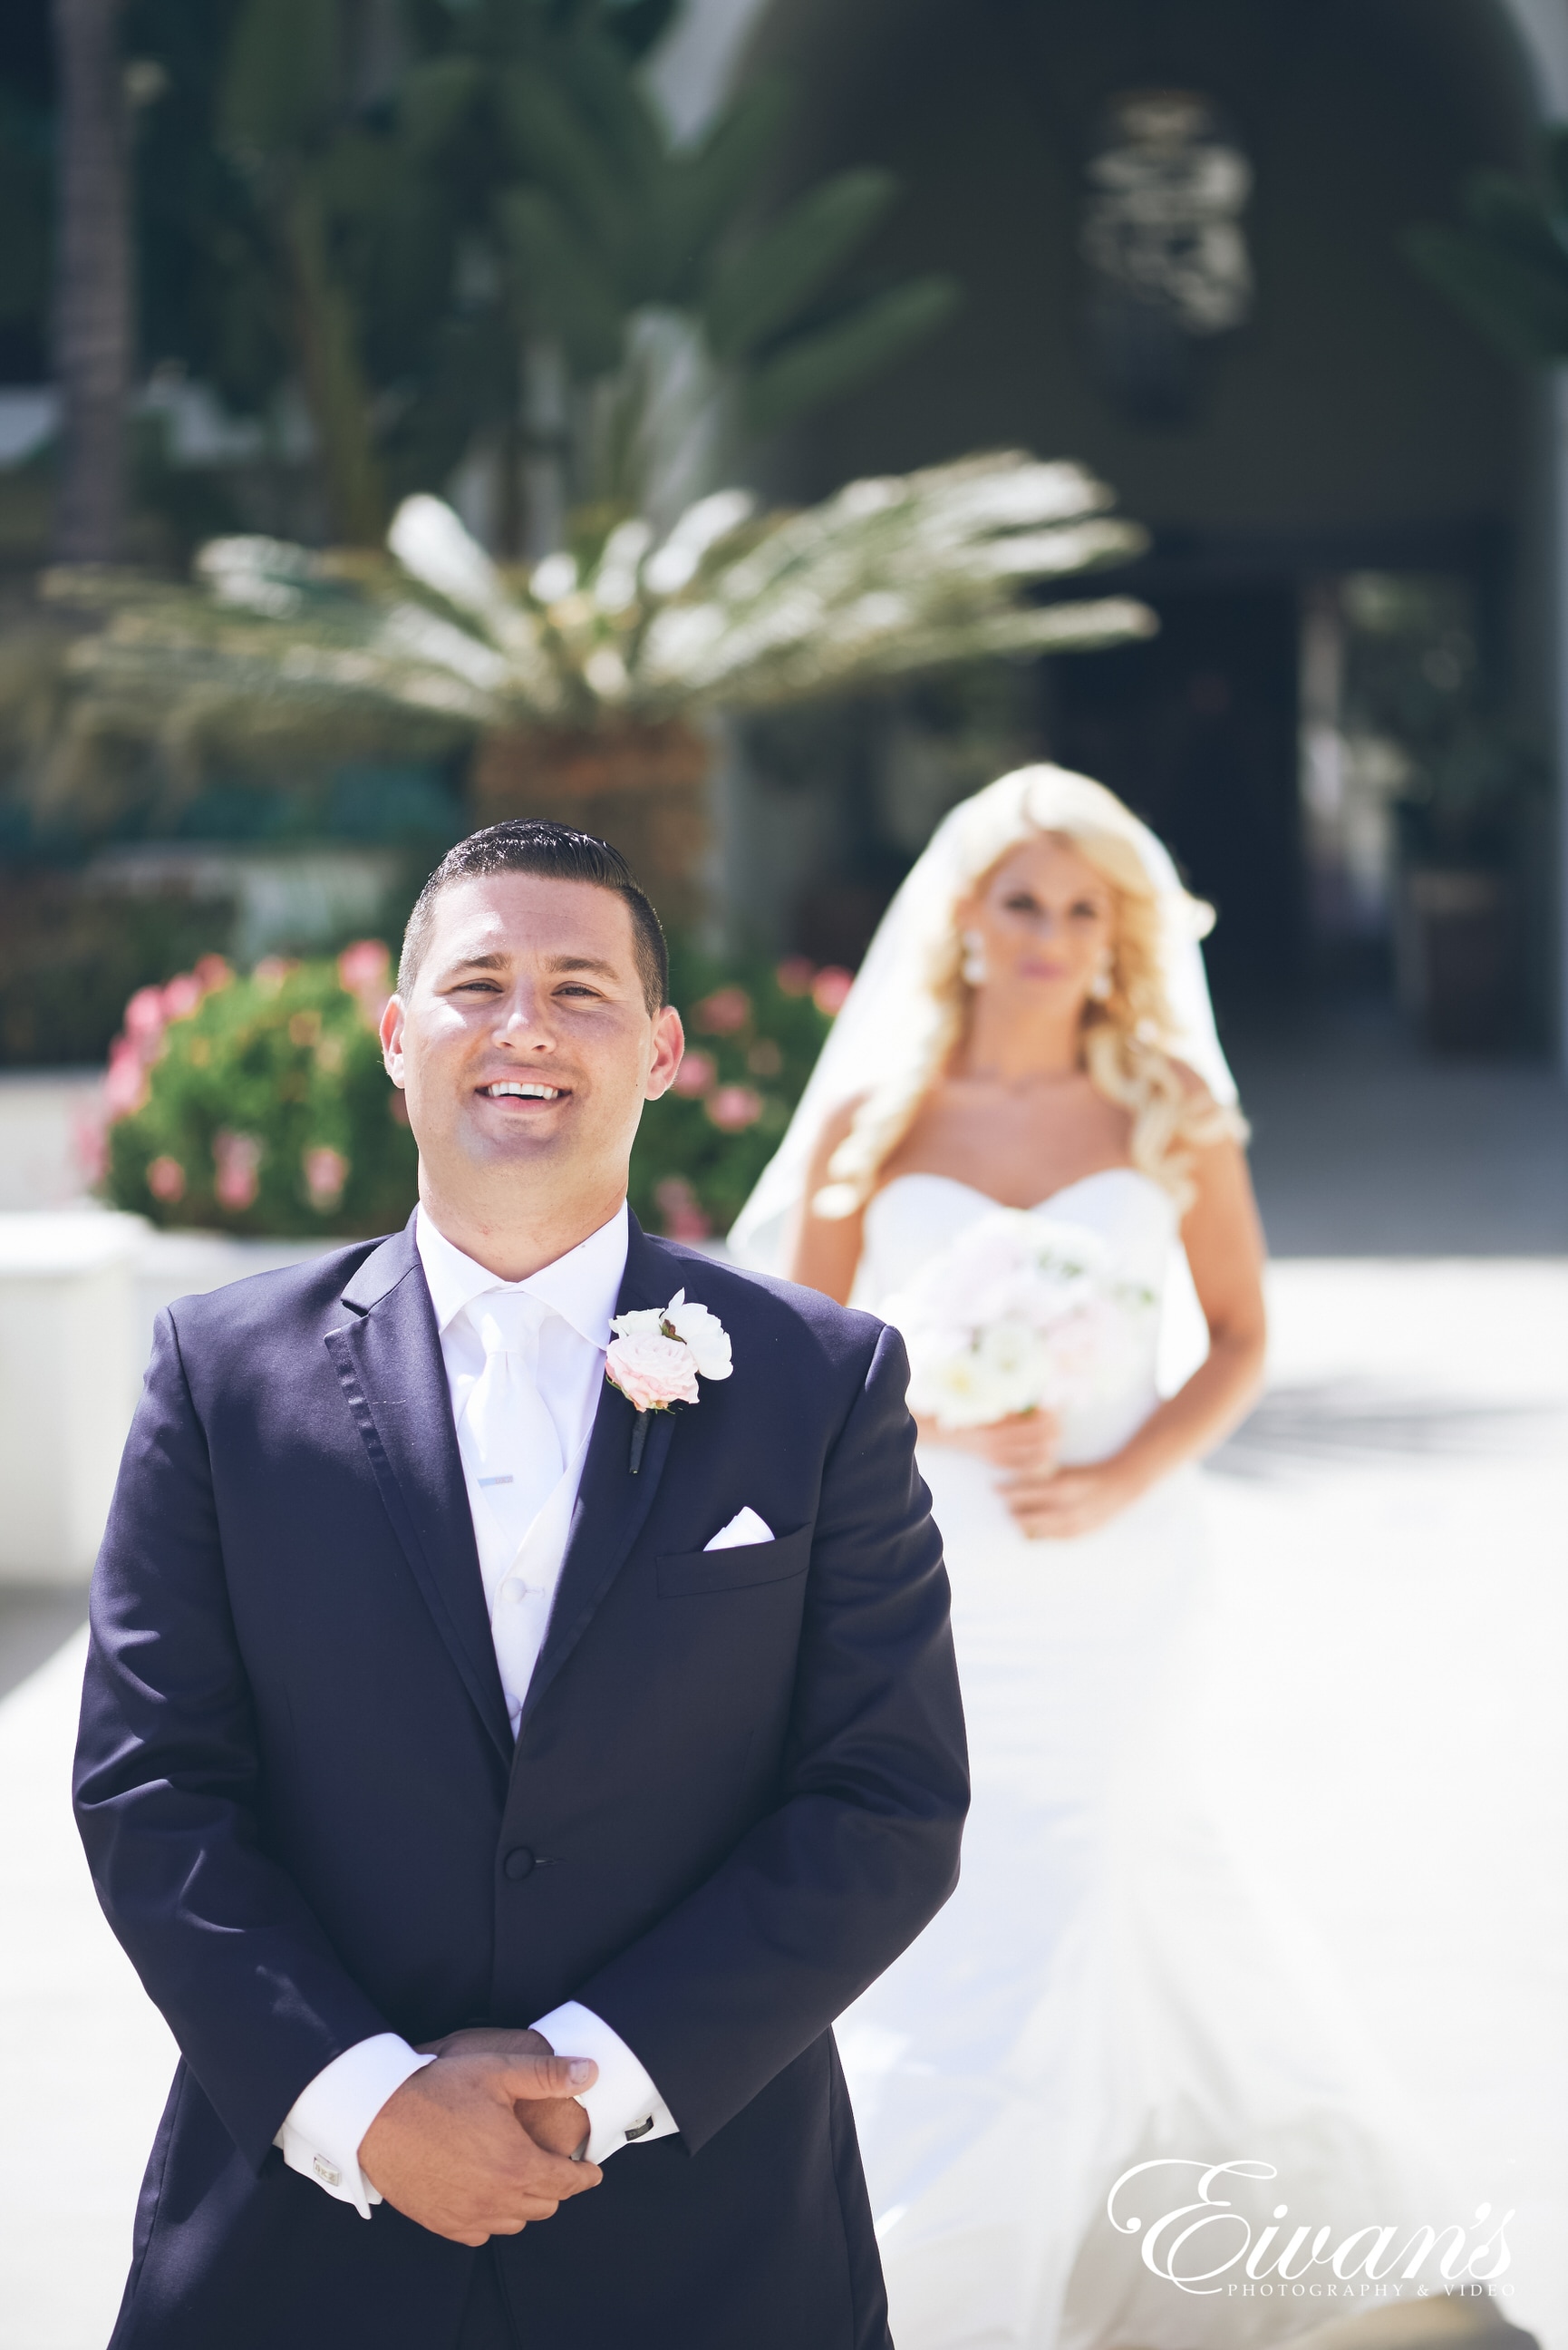 man in black suit and woman in white wedding dress